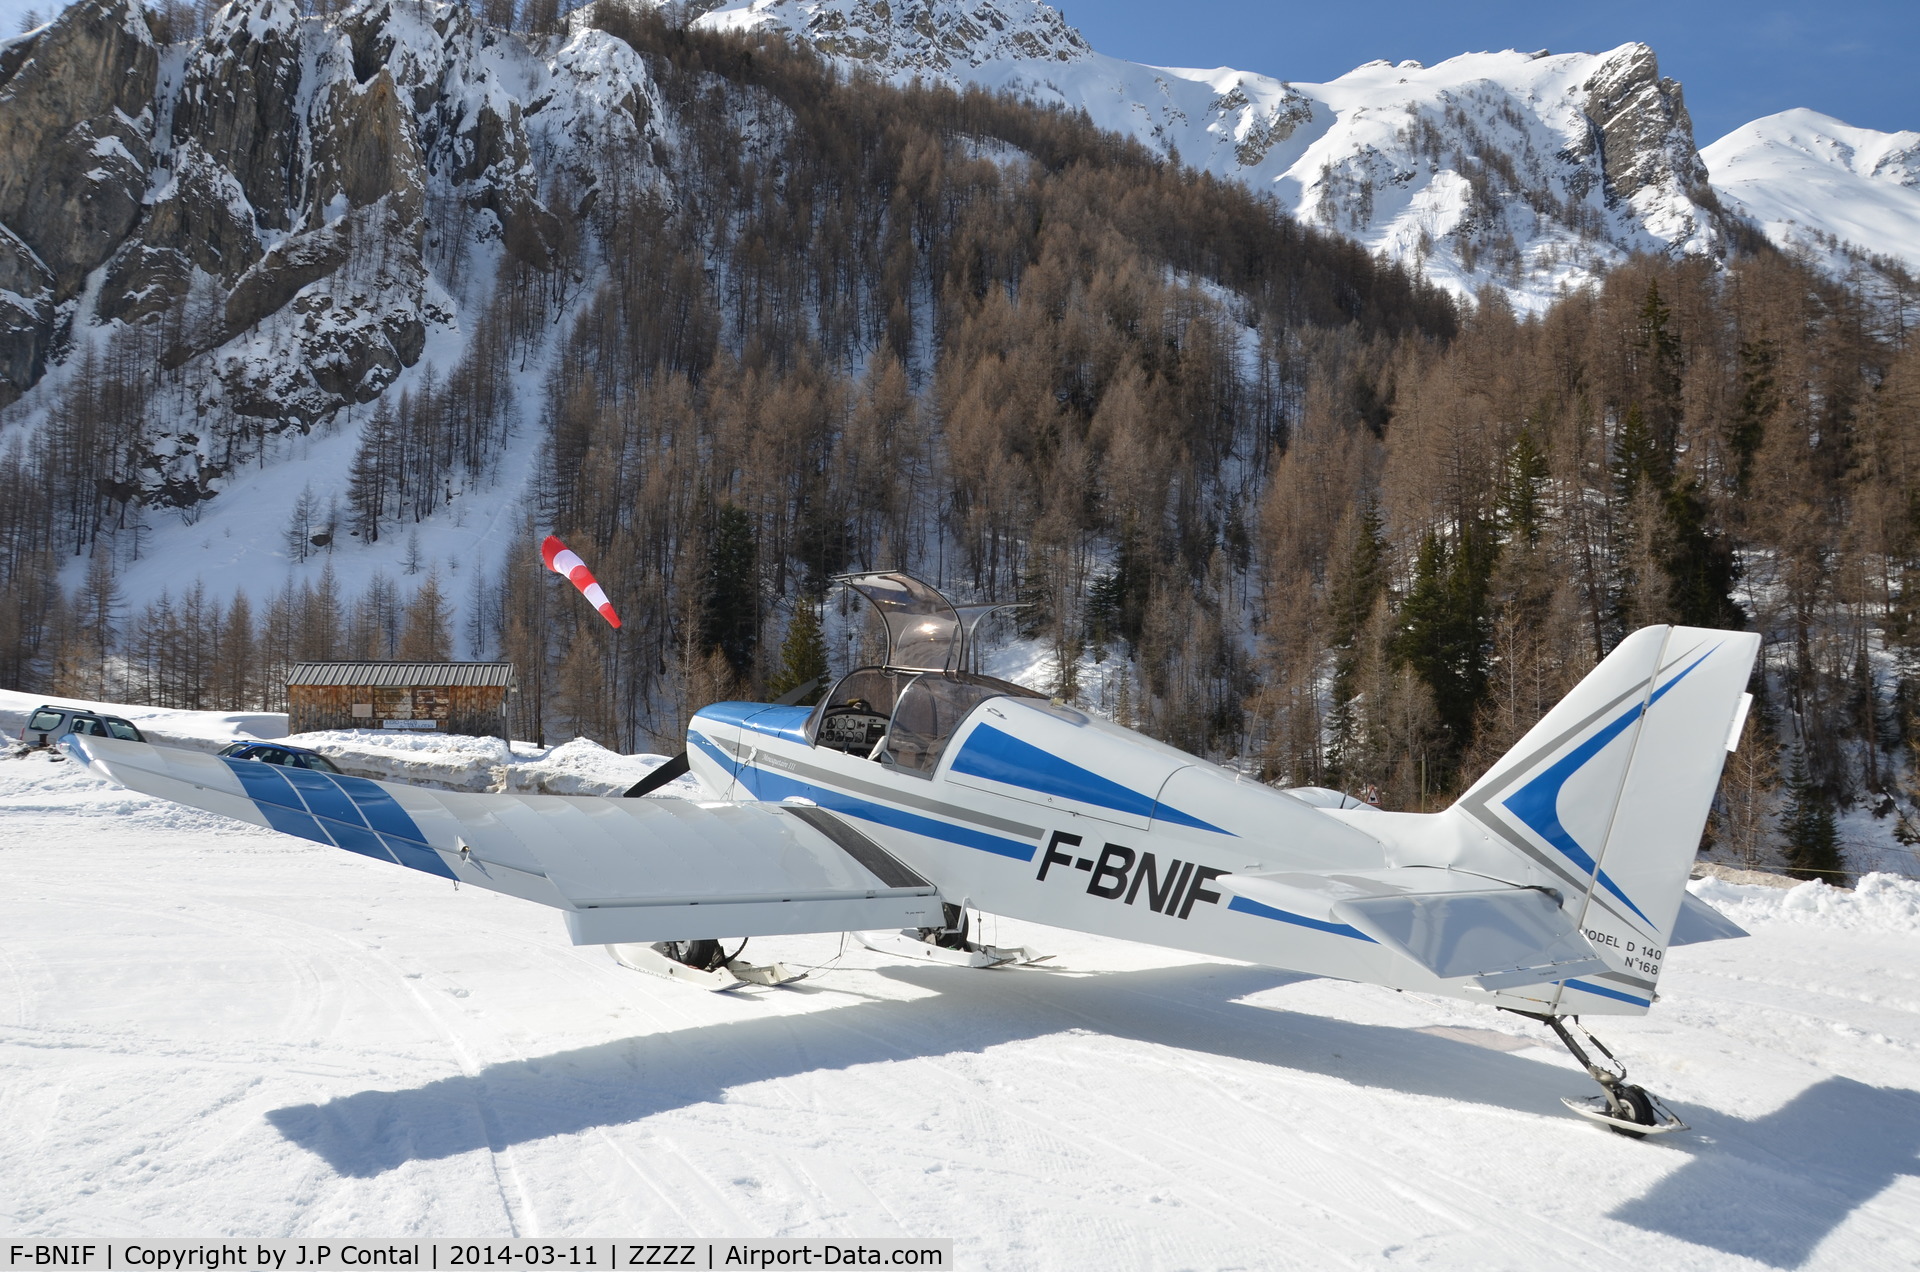 F-BNIF, SAN Jodel D-140E Mousquetaire IV C/N 168, Altisurface de Valloire/Bonnenuit.
F-BNIF parked heading South on the platform. In the background : the airclub house, the windsock, and the 